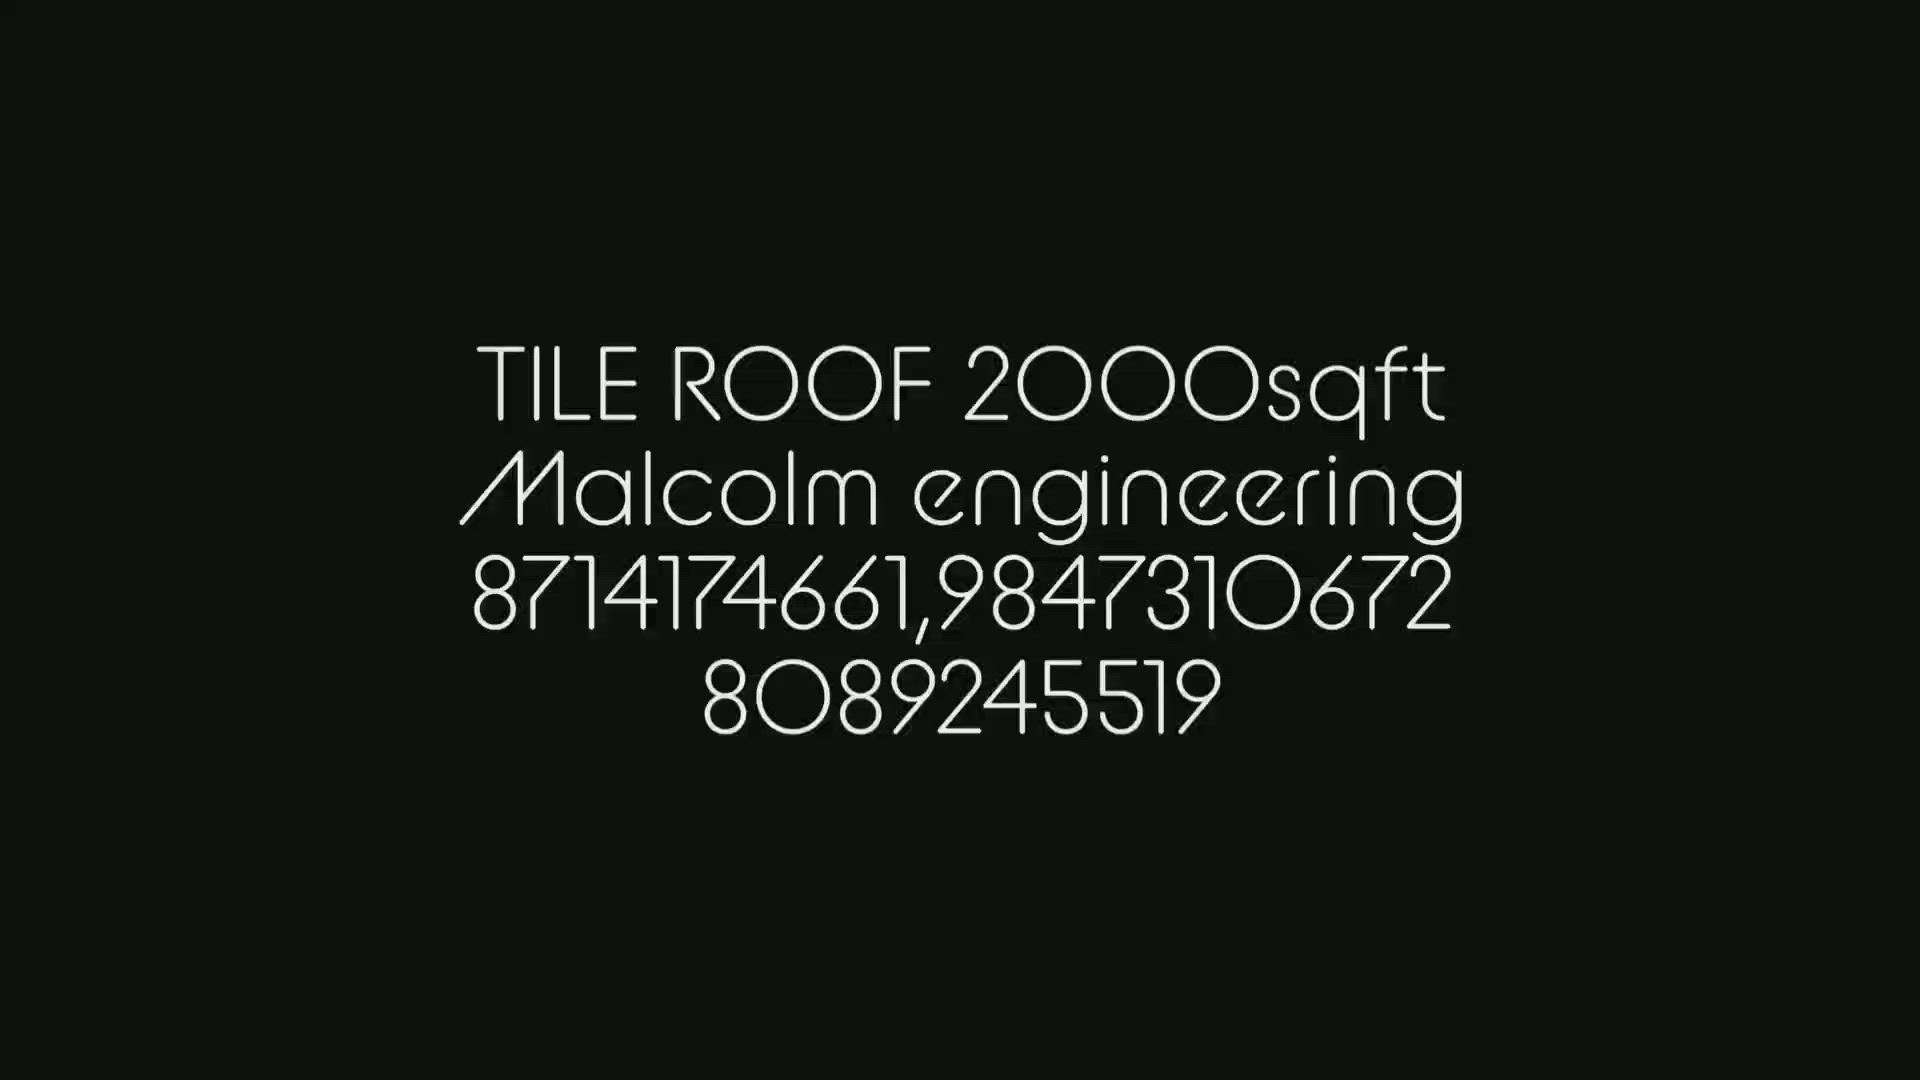 Roof Designs by Contractor Clinton Symeanthy, Ernakulam | Kolo